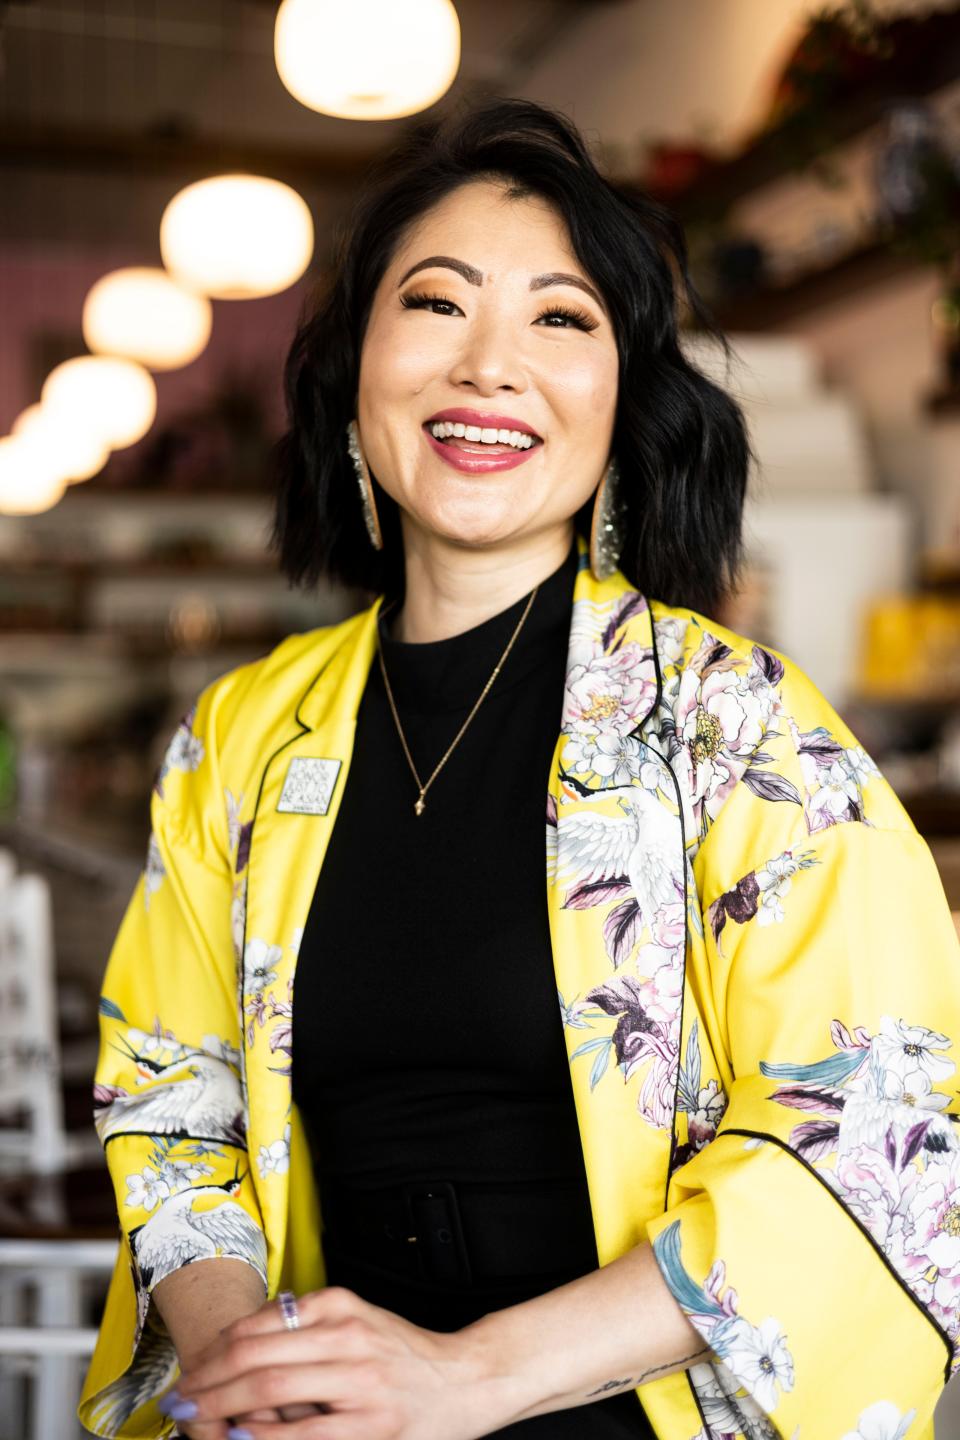 SunAh Laybourn is a University of Memphis sociology professor who led the charge to have Memphis-based programming during Asian American and Pacific Islander Heritage Month in Memphis for the first time this year. She poses for a portrait on May 24, 2023, at the bar inside of Good Fortune in Downtown Memphis.